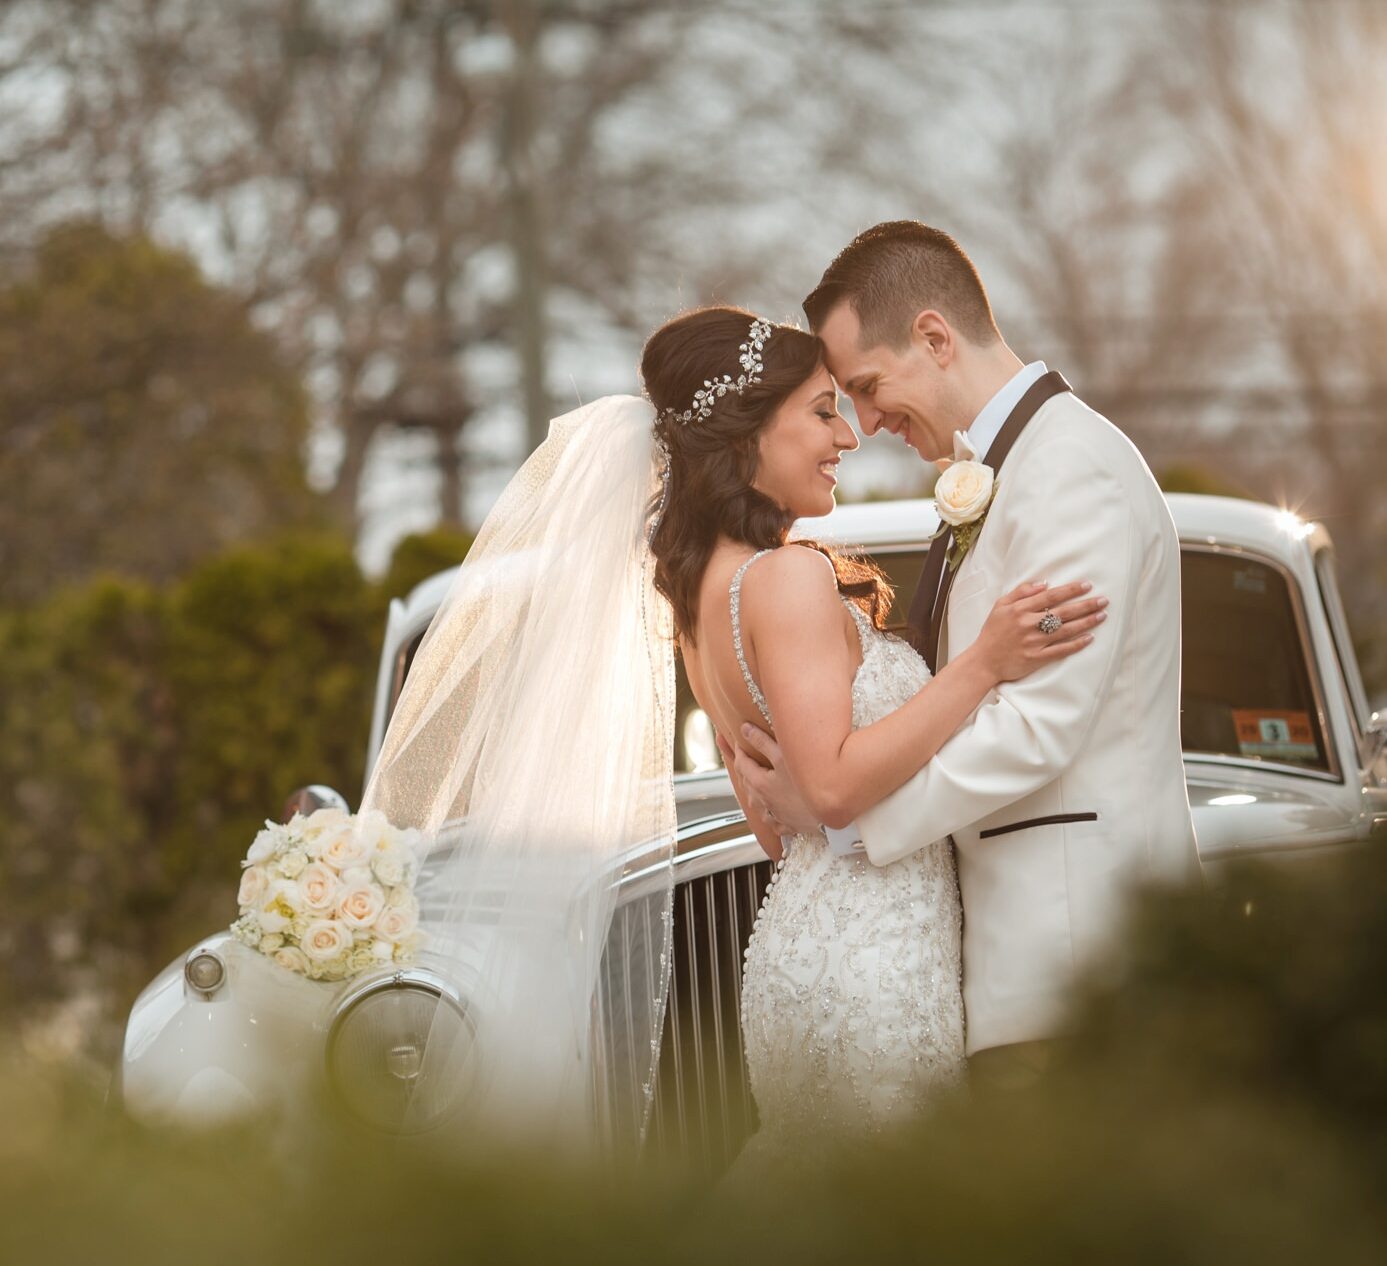 A bride and groom share a romantic kiss beside a classic car at their Estate at Florentine Gardens wedding.